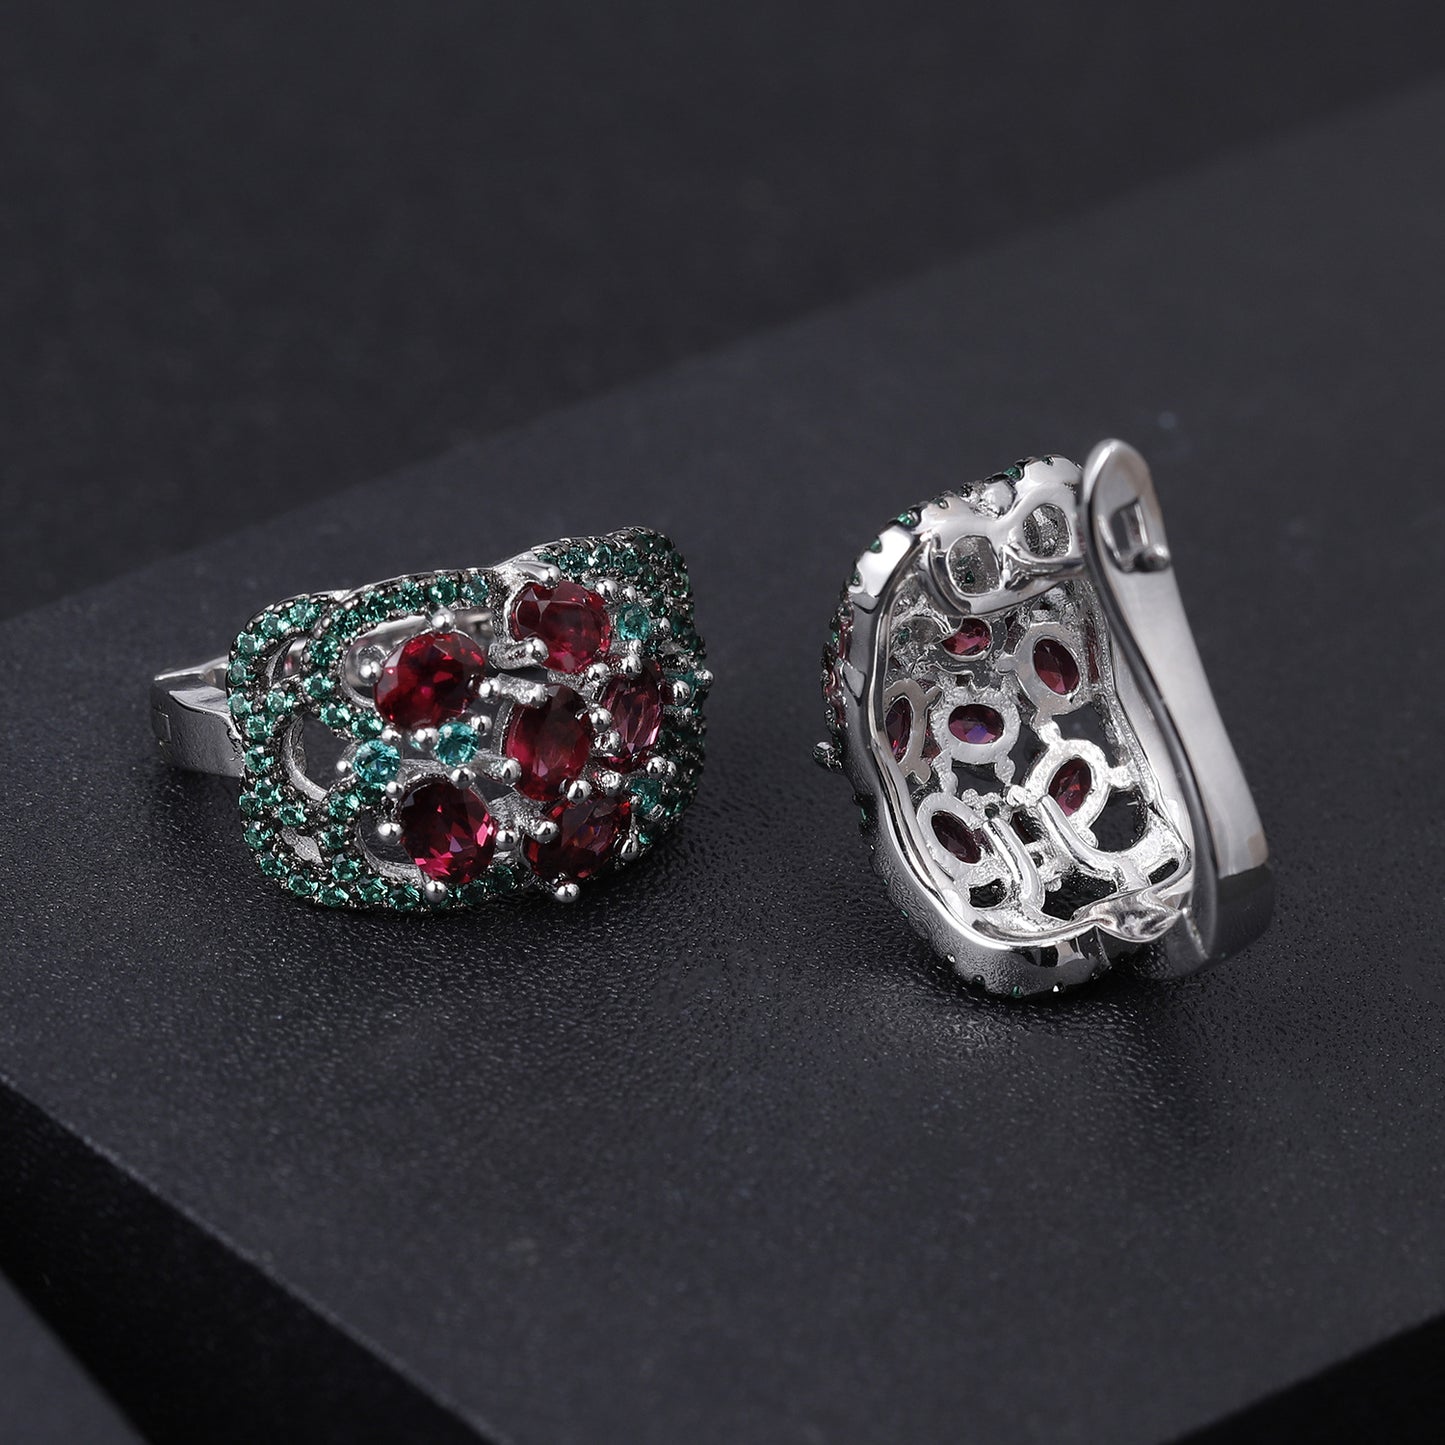 Luxury Hollow Wide Surface Design Natural Gemstone Silver Stud Earrings